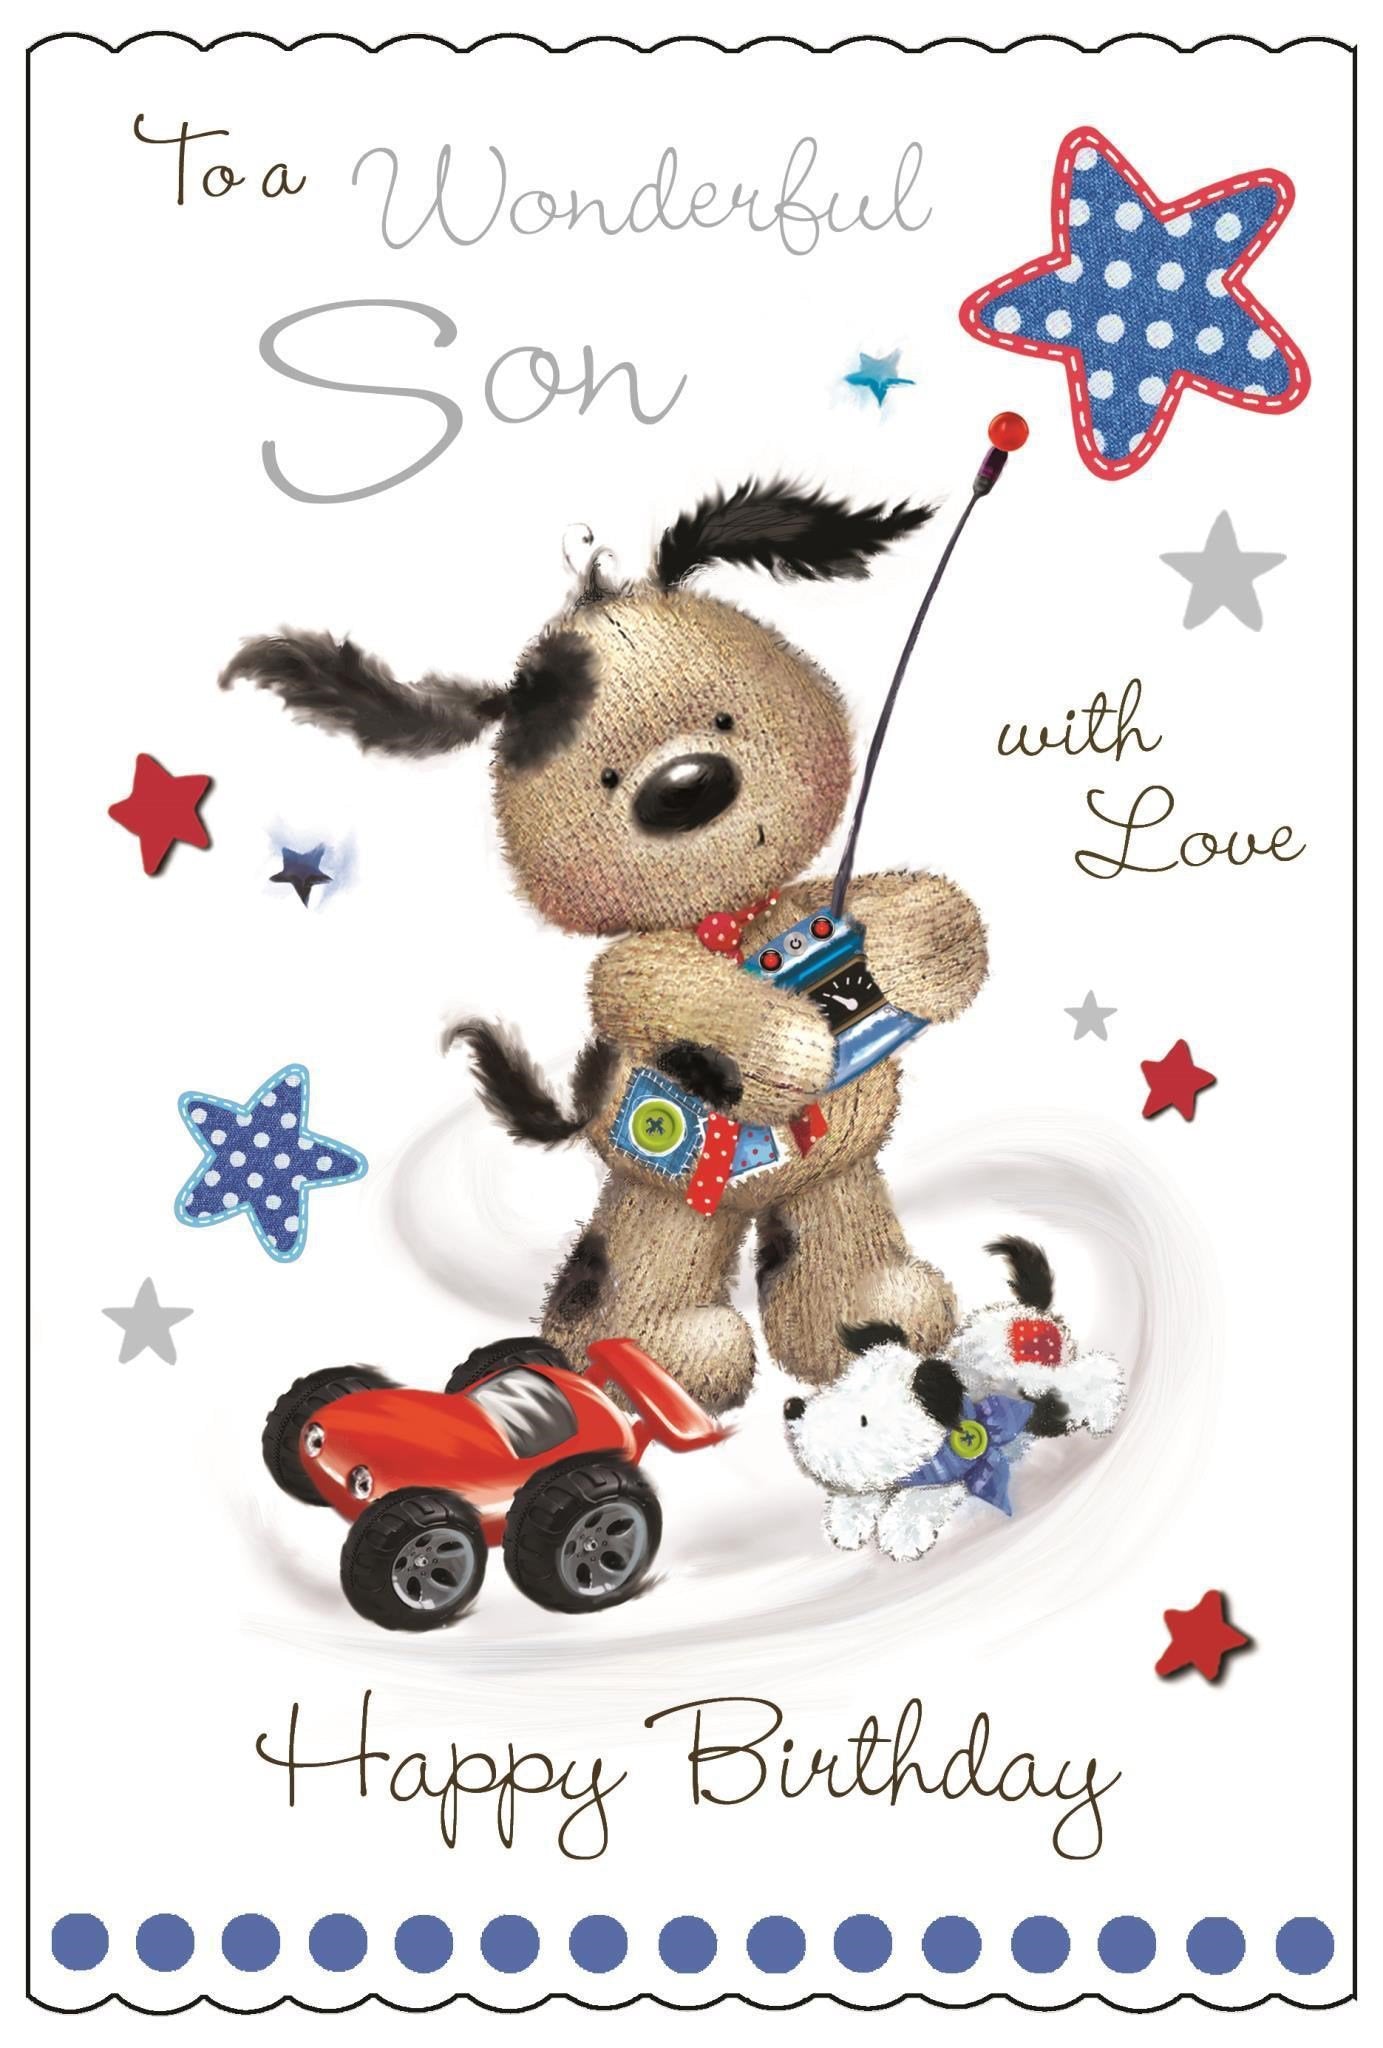 Front of Son Birthday RC Car Greetings Card